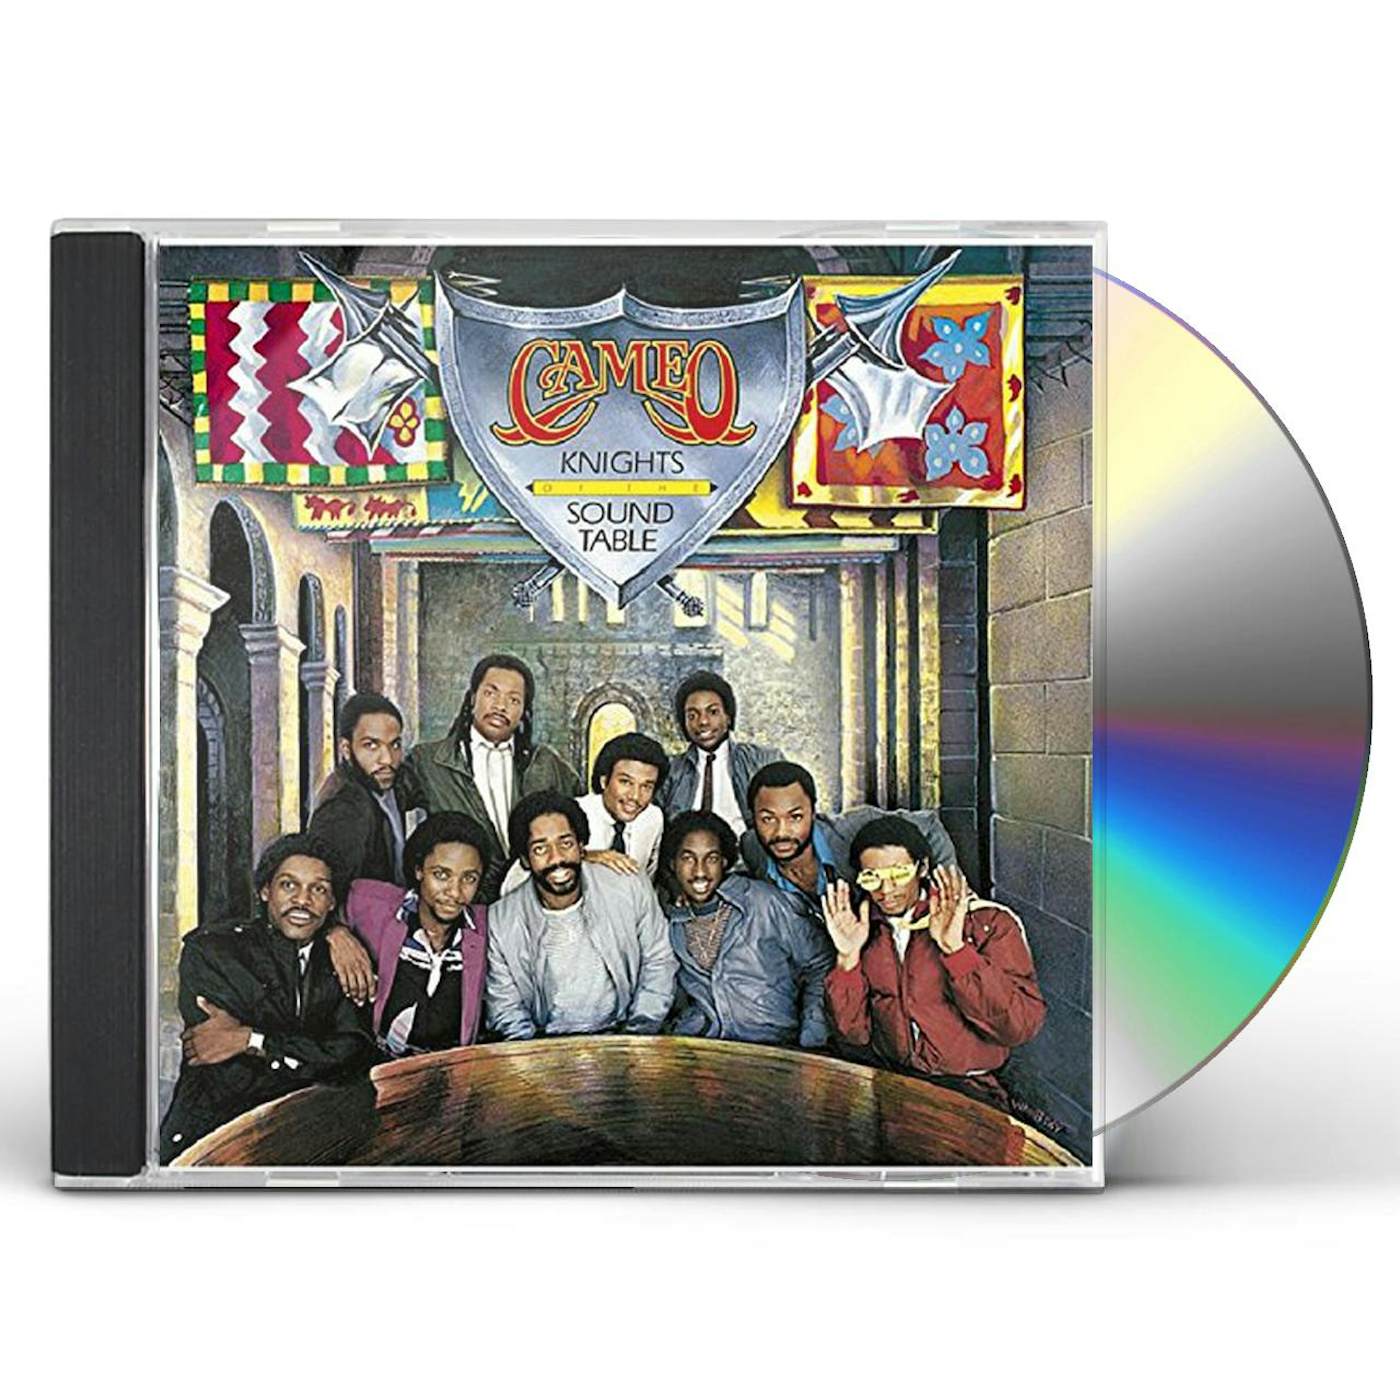 Cameo KNIGHTS OF THE SOUND TABLE CD